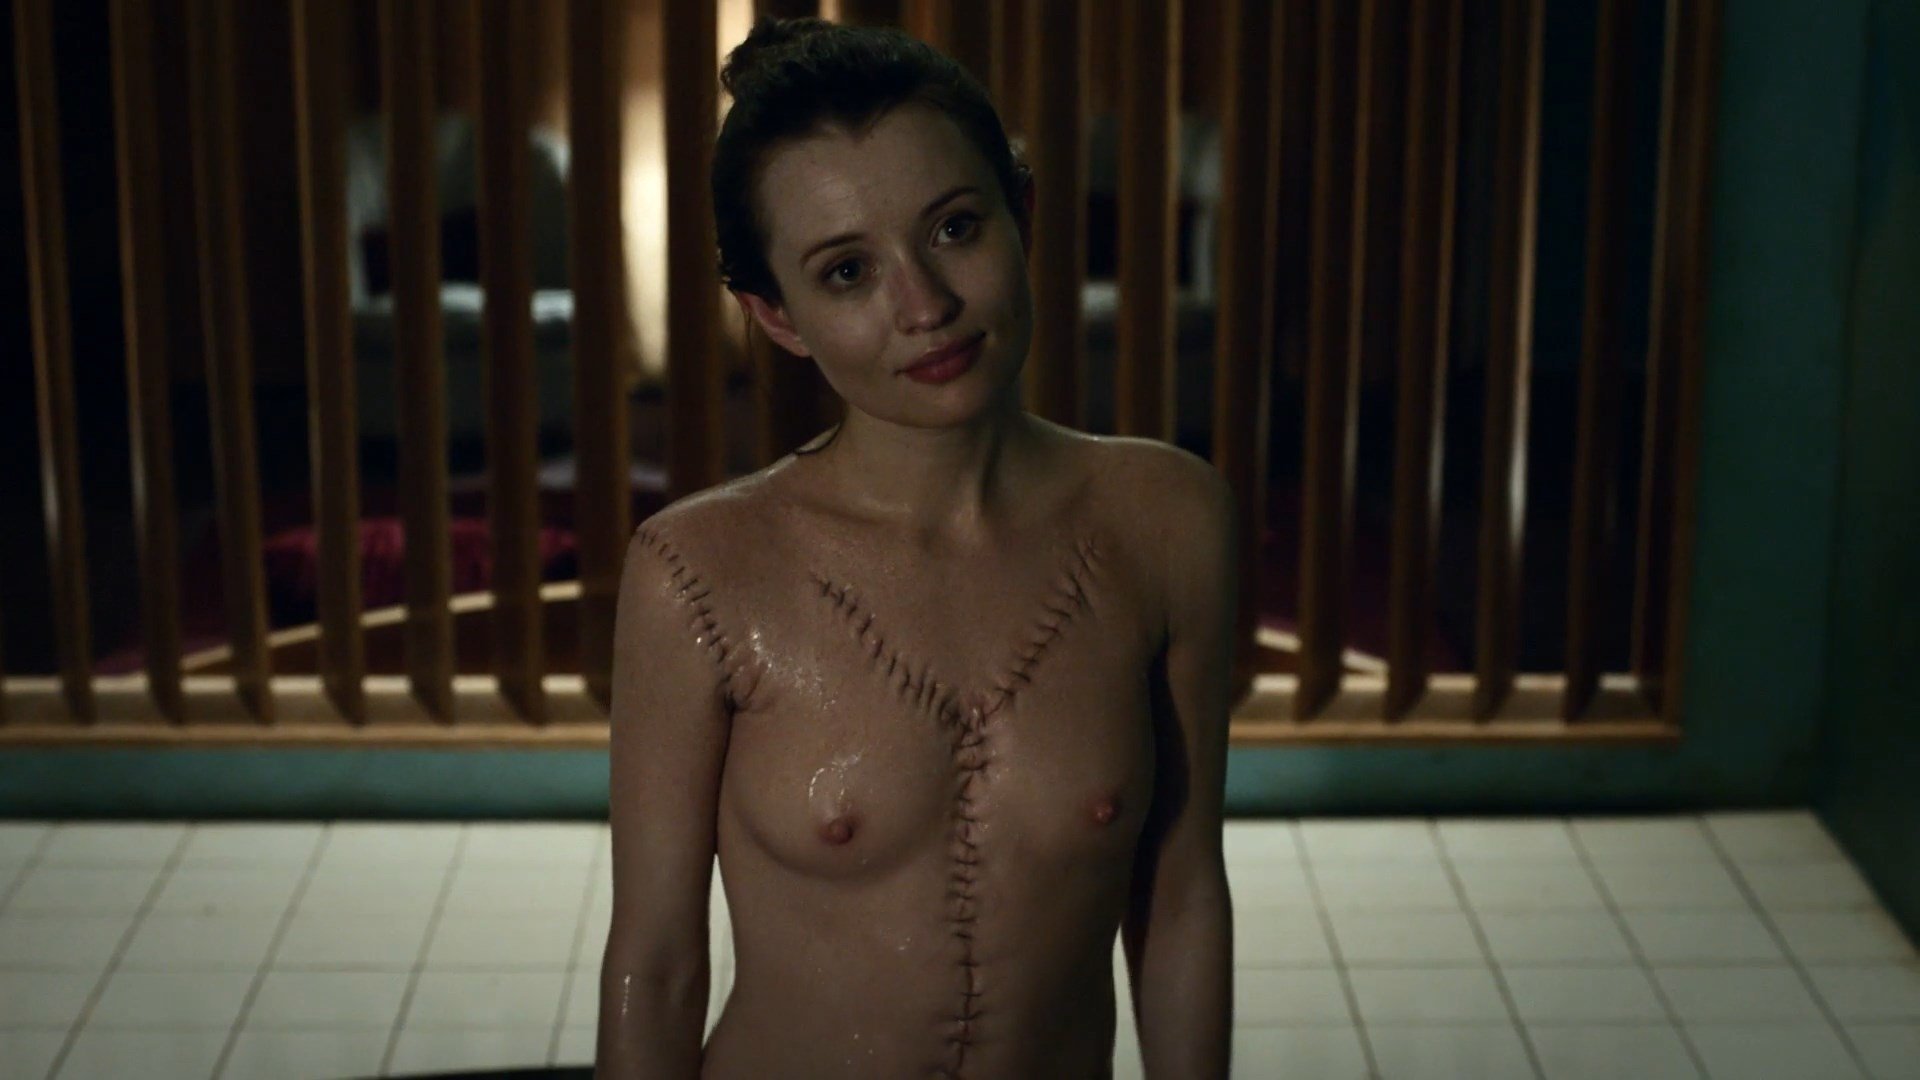 Emily browning nude pictures